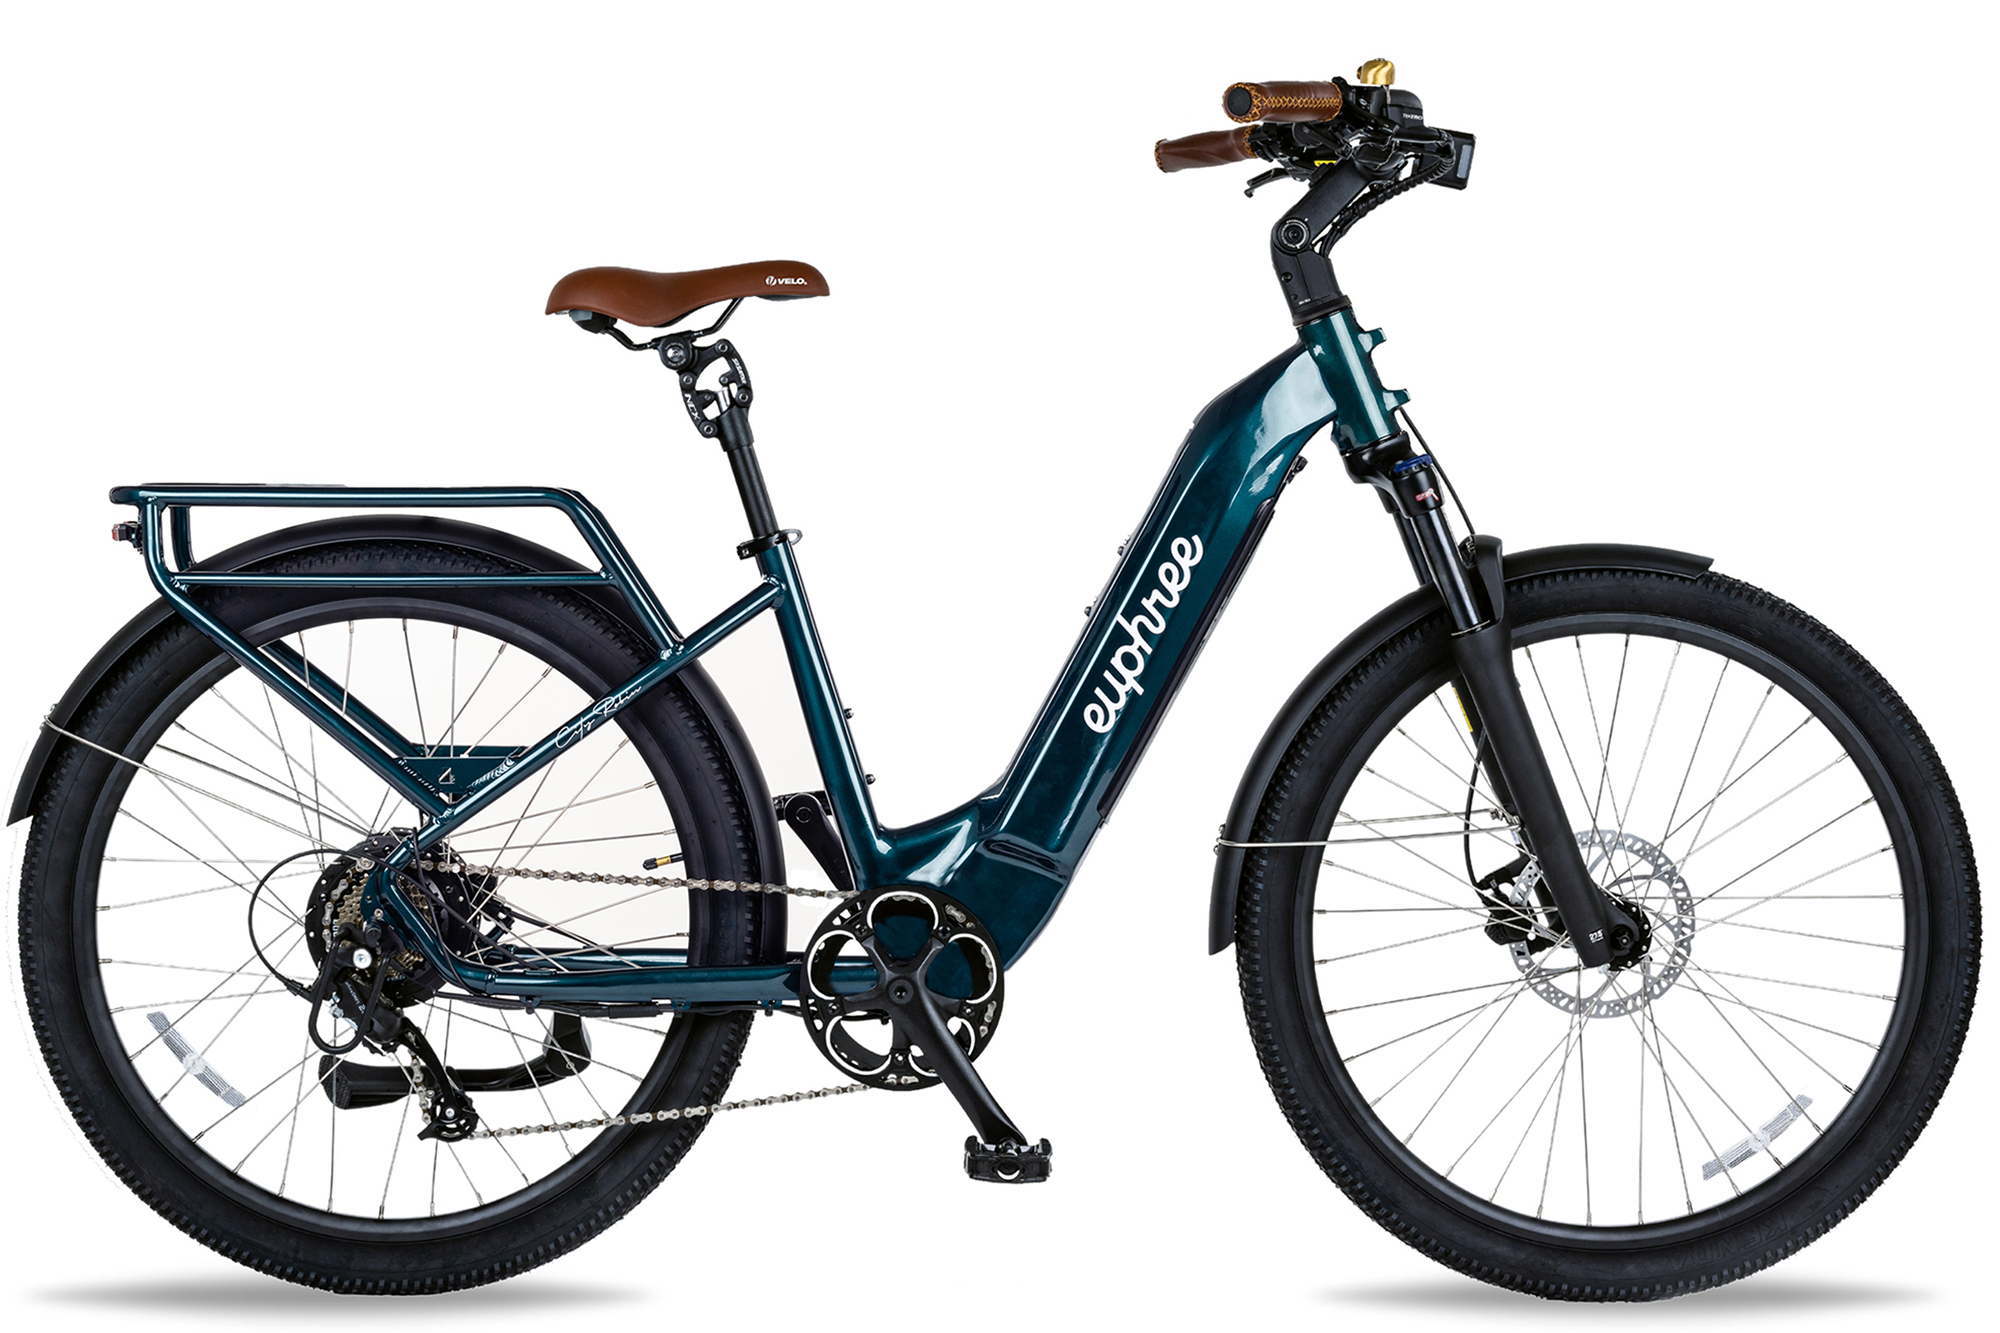 Emerald Green Step Thru Electric Bike from Euphree - Comfortable and Stylish Electric Bike with Step-Through Frame